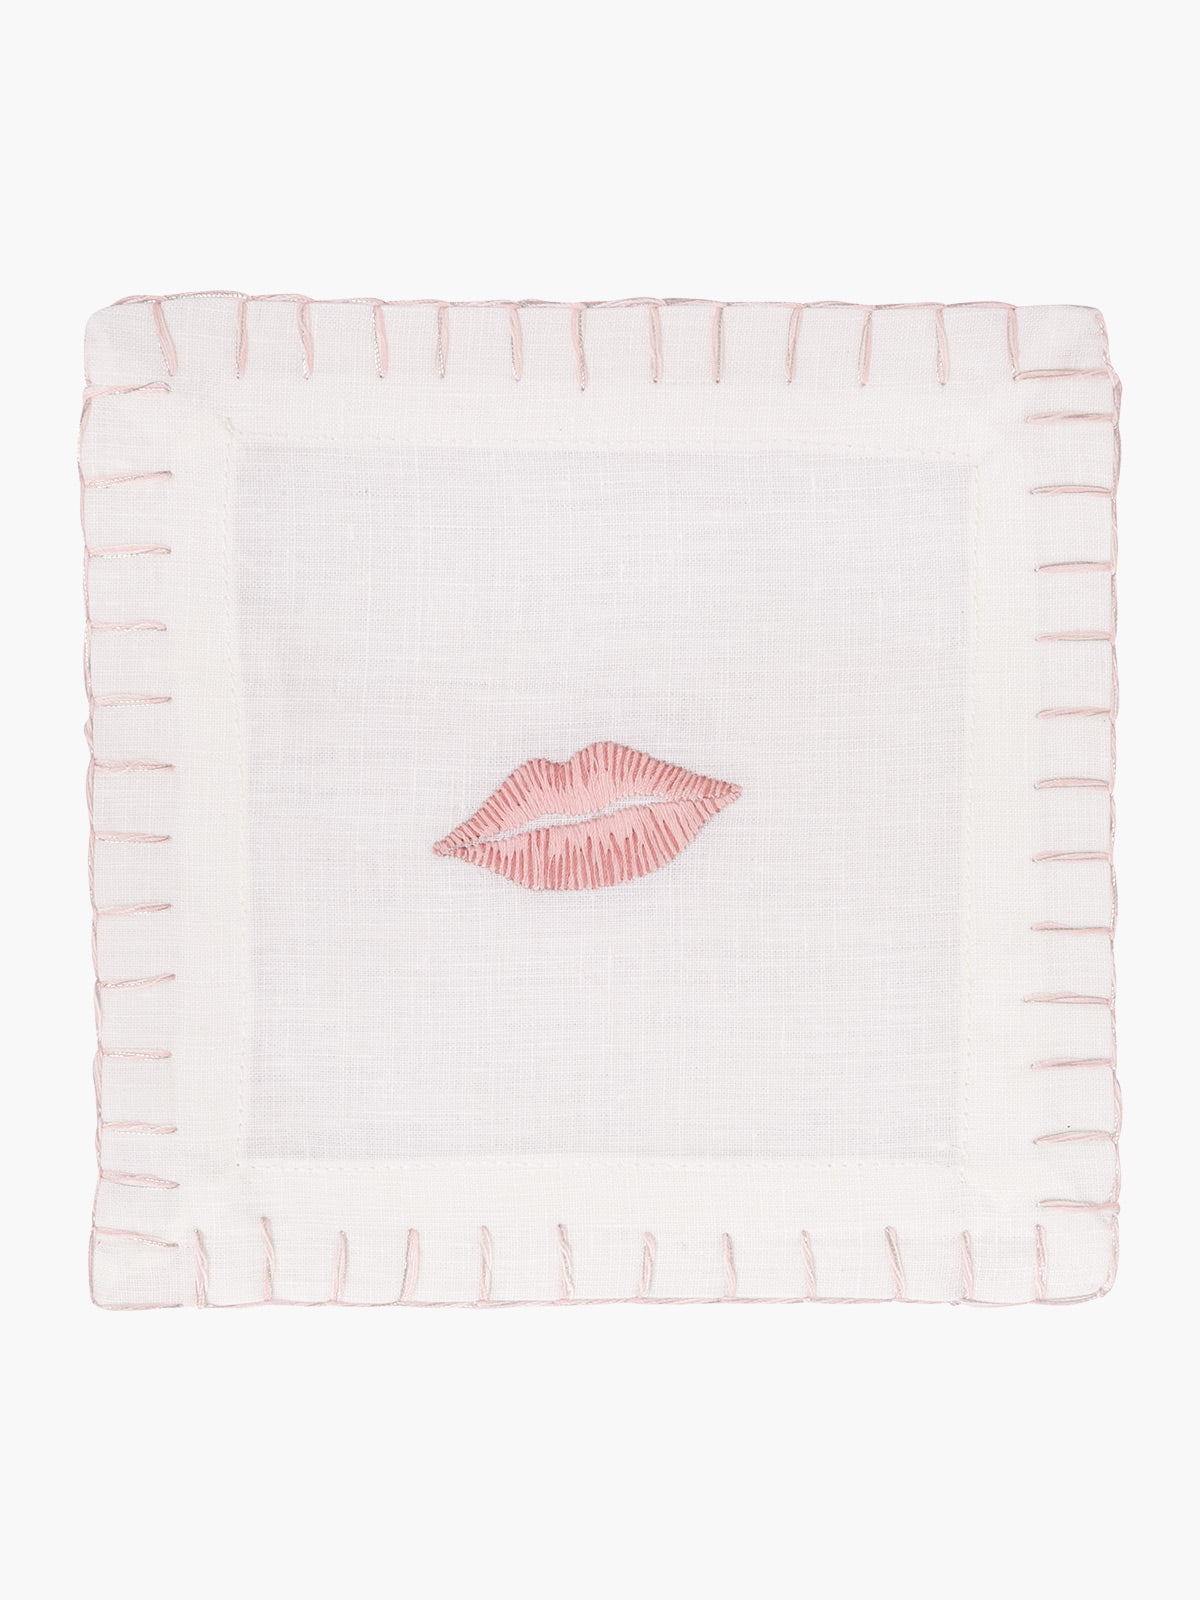 Cocktail Napkin Set of 4 | Beso Cocktail Napkin Set of 4 | Beso